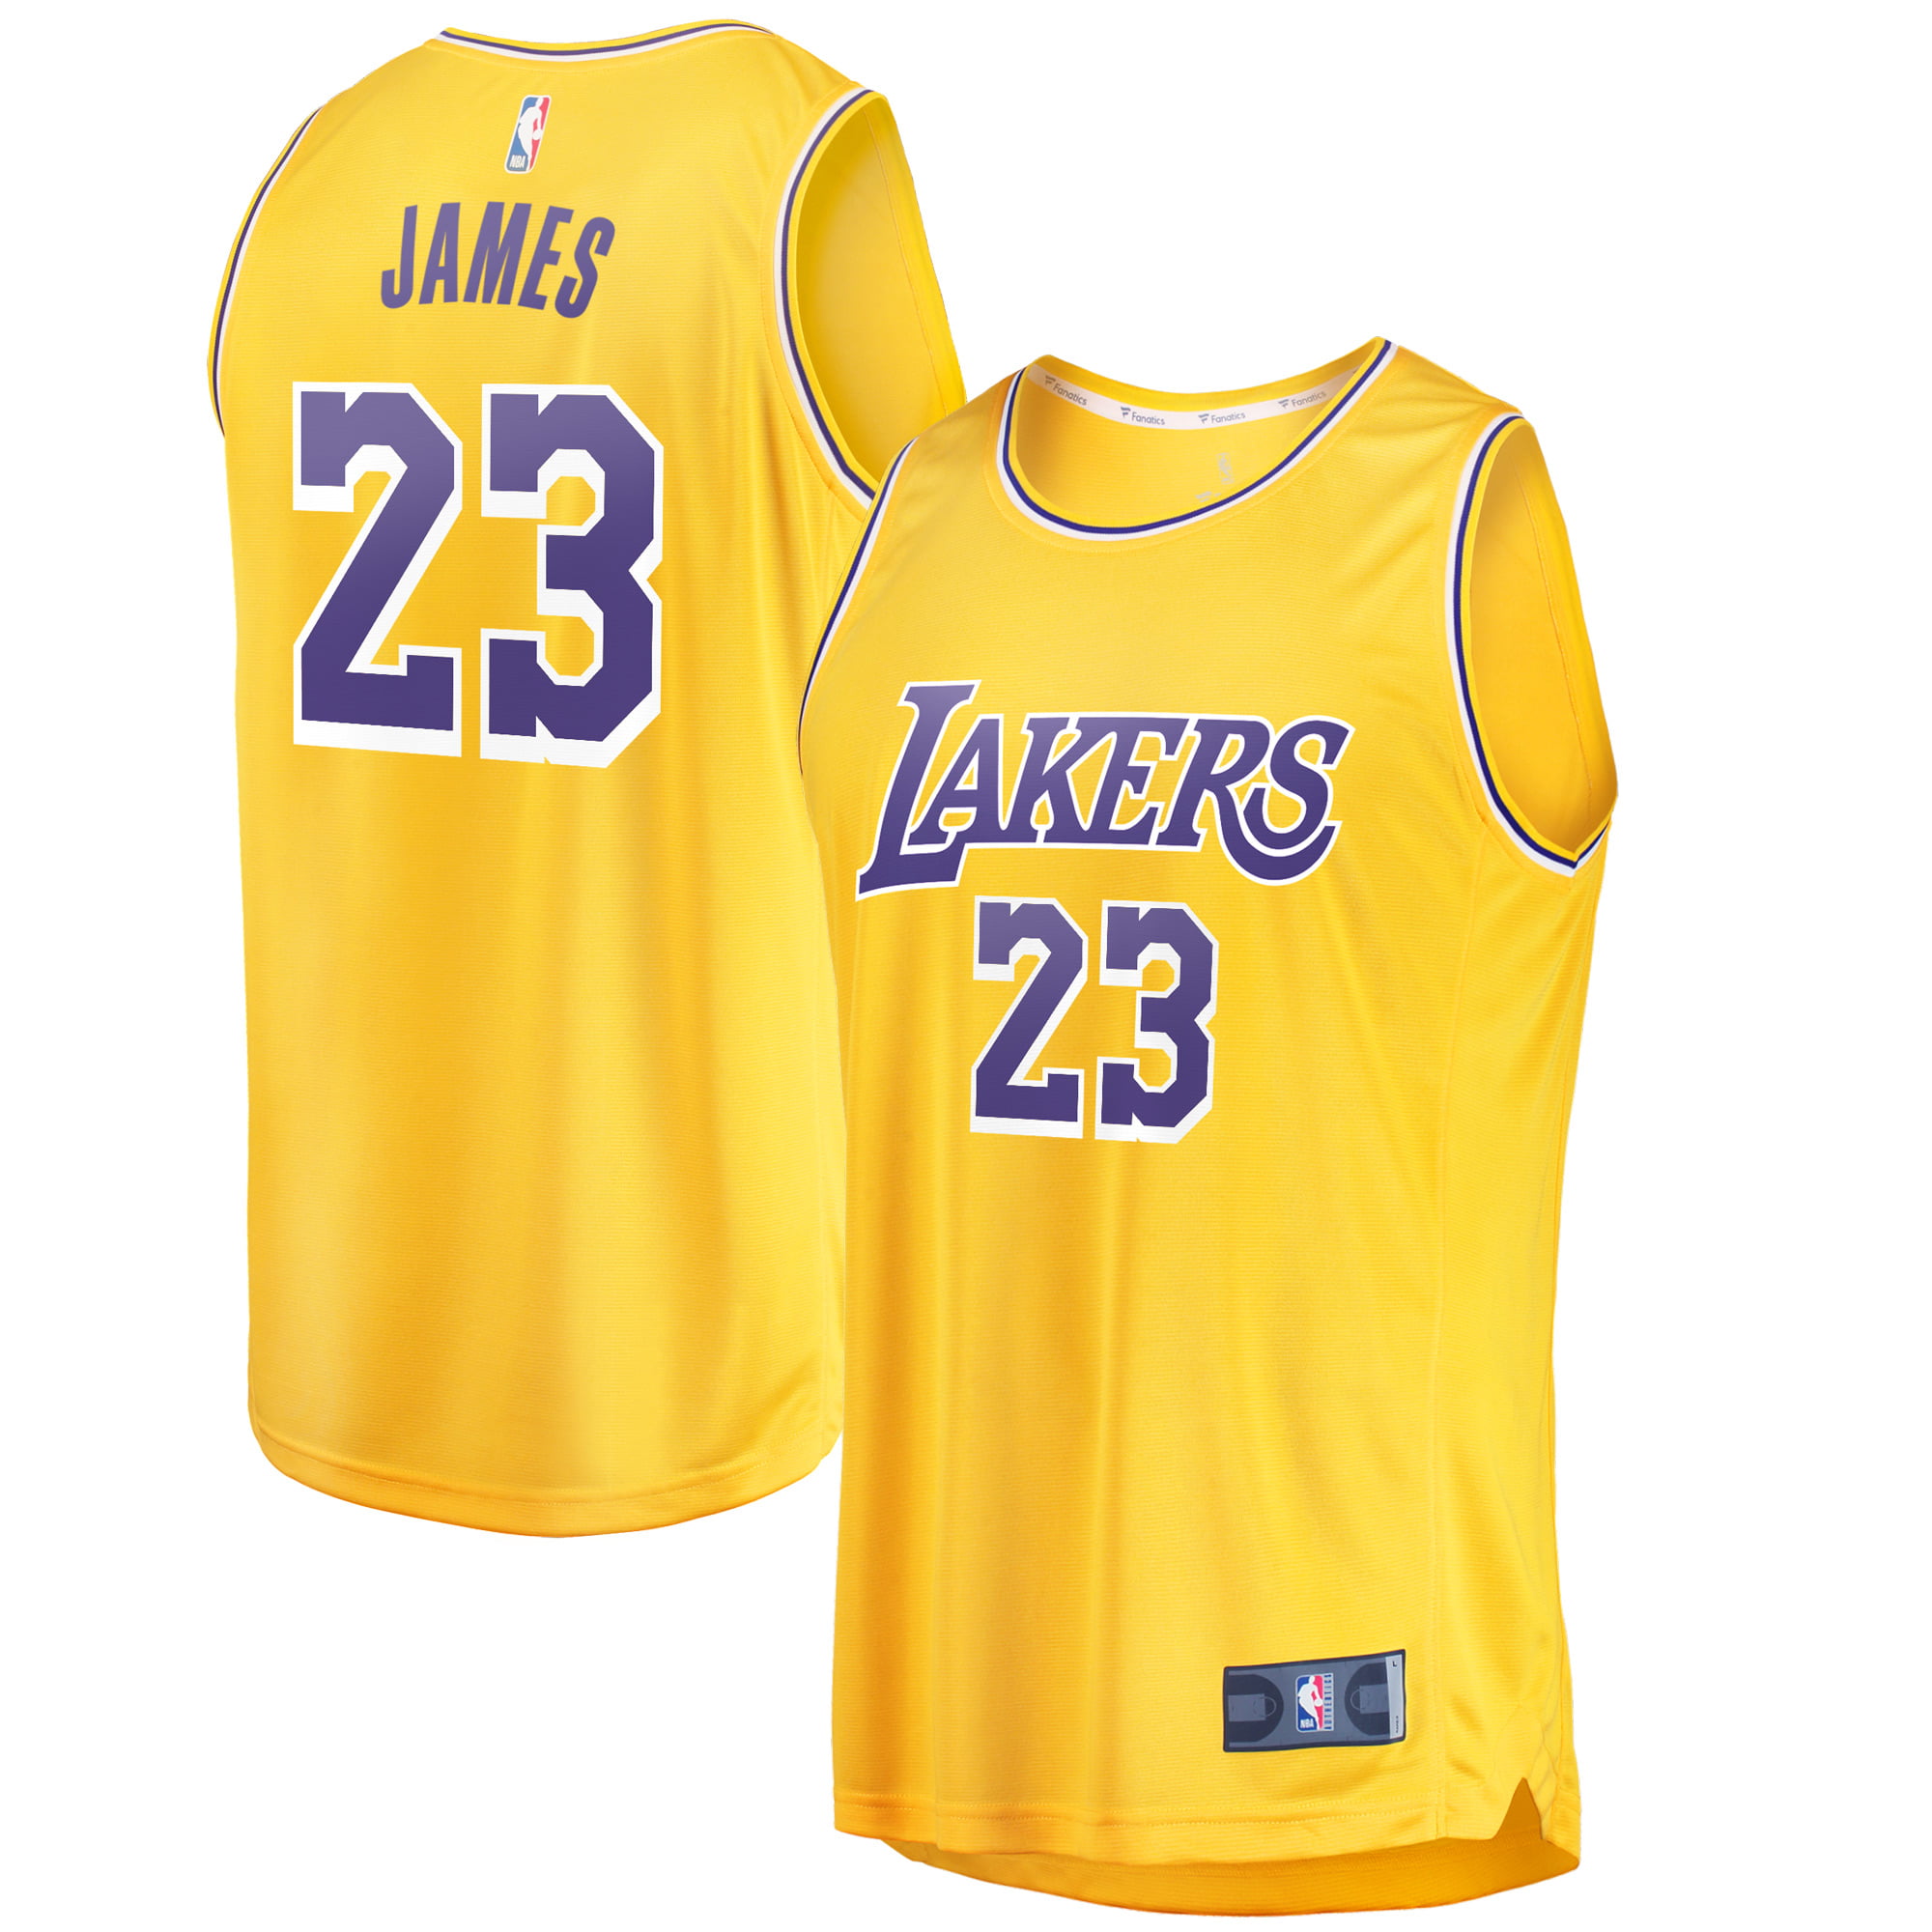 LeBron James #23 Los Angeles Lakers Basketball Jersey Stitched Blue Jerseys S-XX 